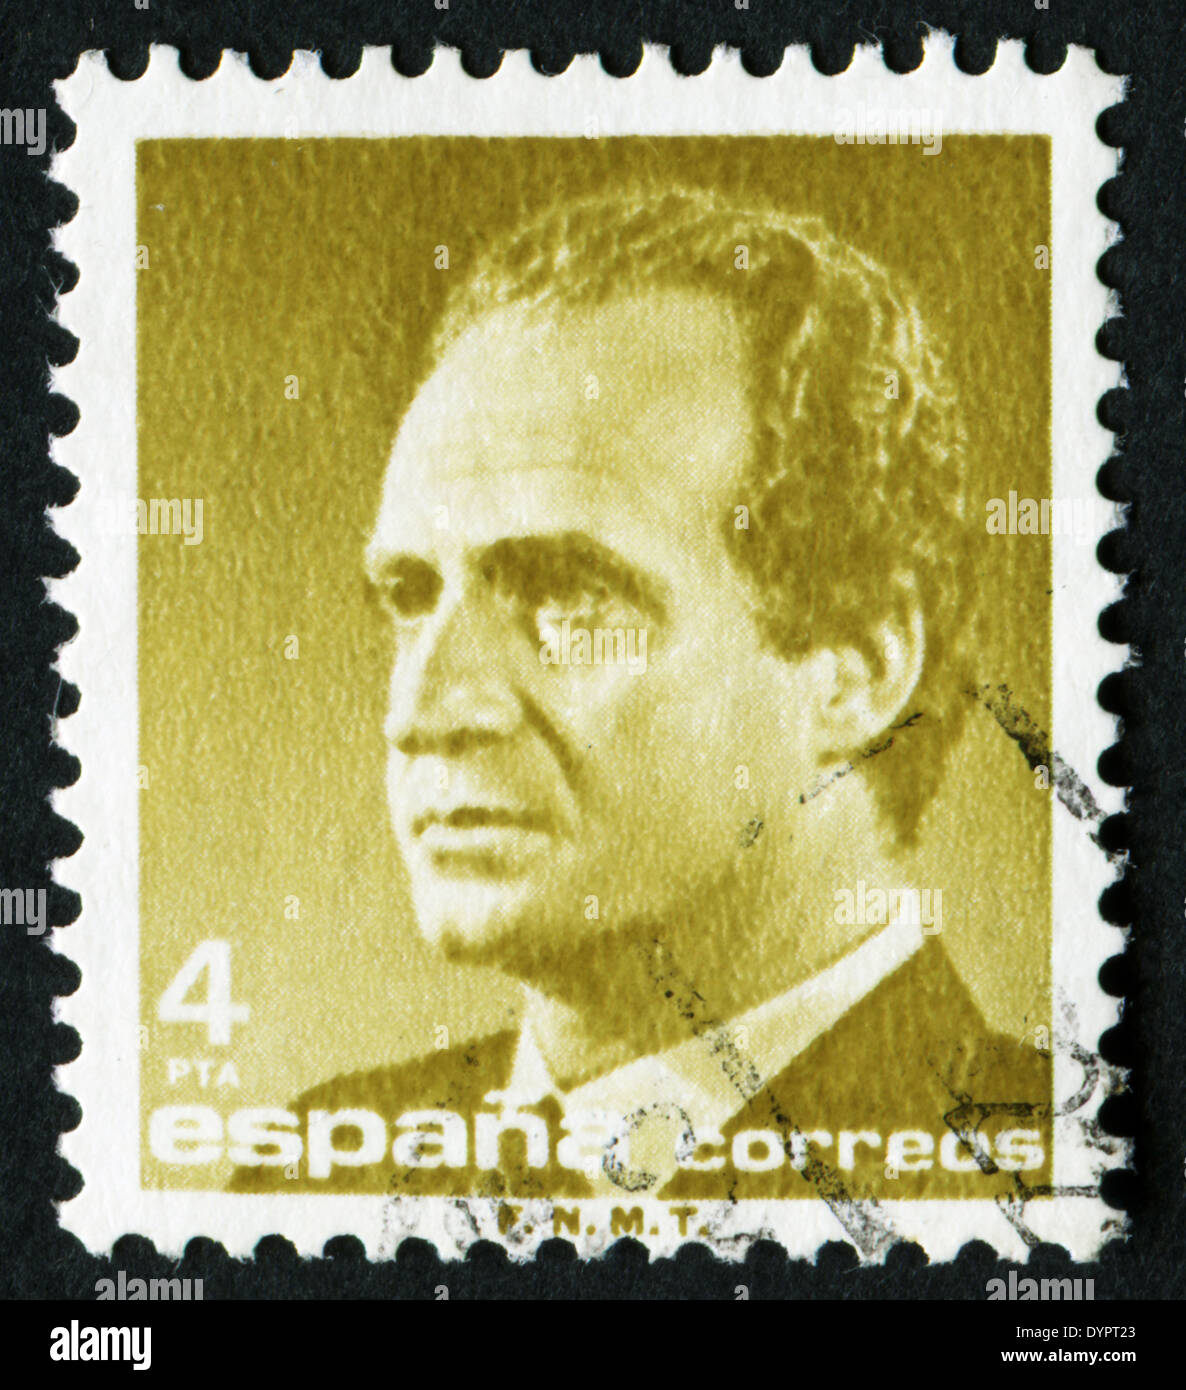 SPAIN - CIRCA 1985: A stamp printed in Spain shows a portrait of King Juan Carlos I of Spain without inscription Stock Photo